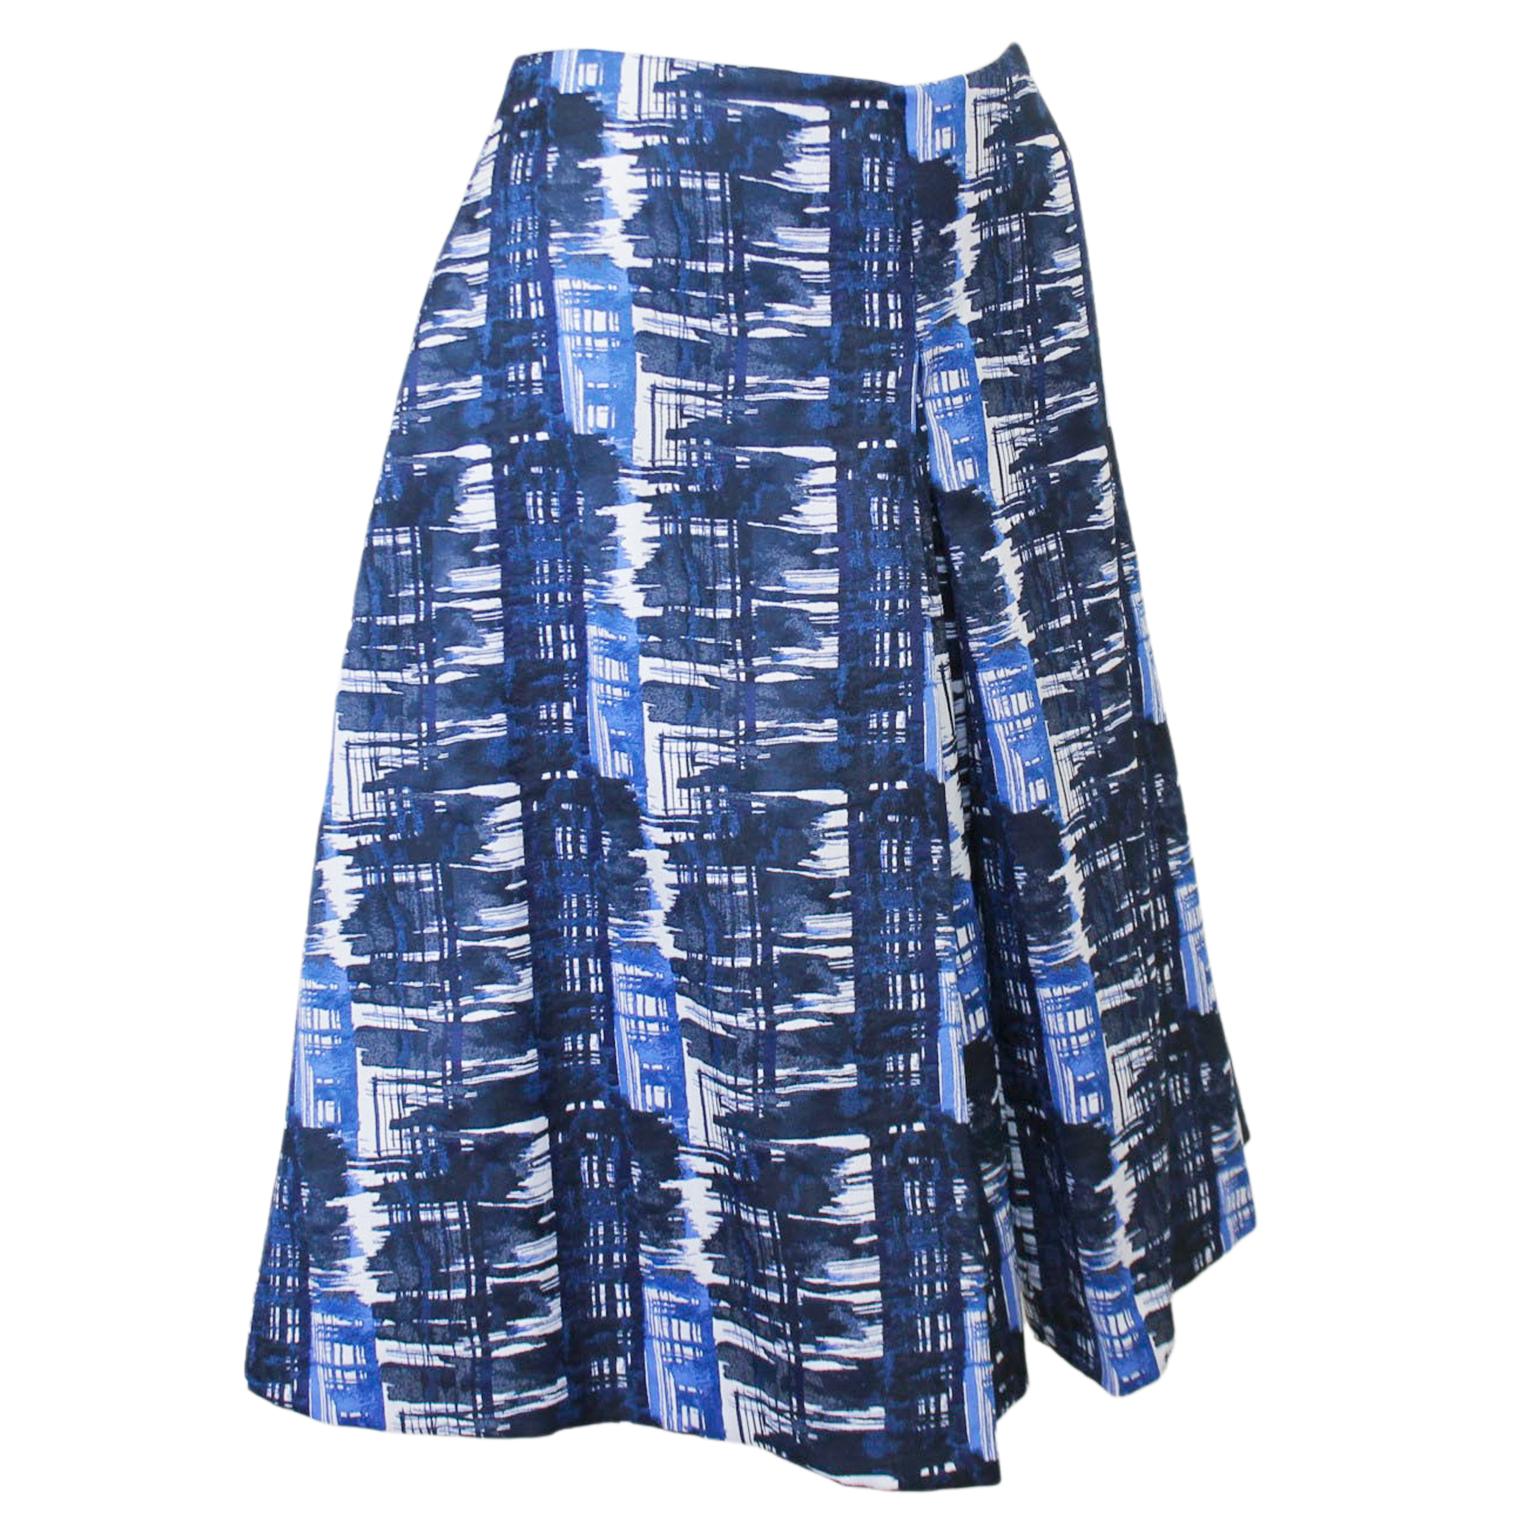 Oscar de la Renta skirt from the early 2000s. The A line skirt has an inverted front pleat and an all over blue abstract print. Zips up the back. In excellent condition. Marked a US 10, fits like a US 6-8. Polyester fabric with a silk lining.